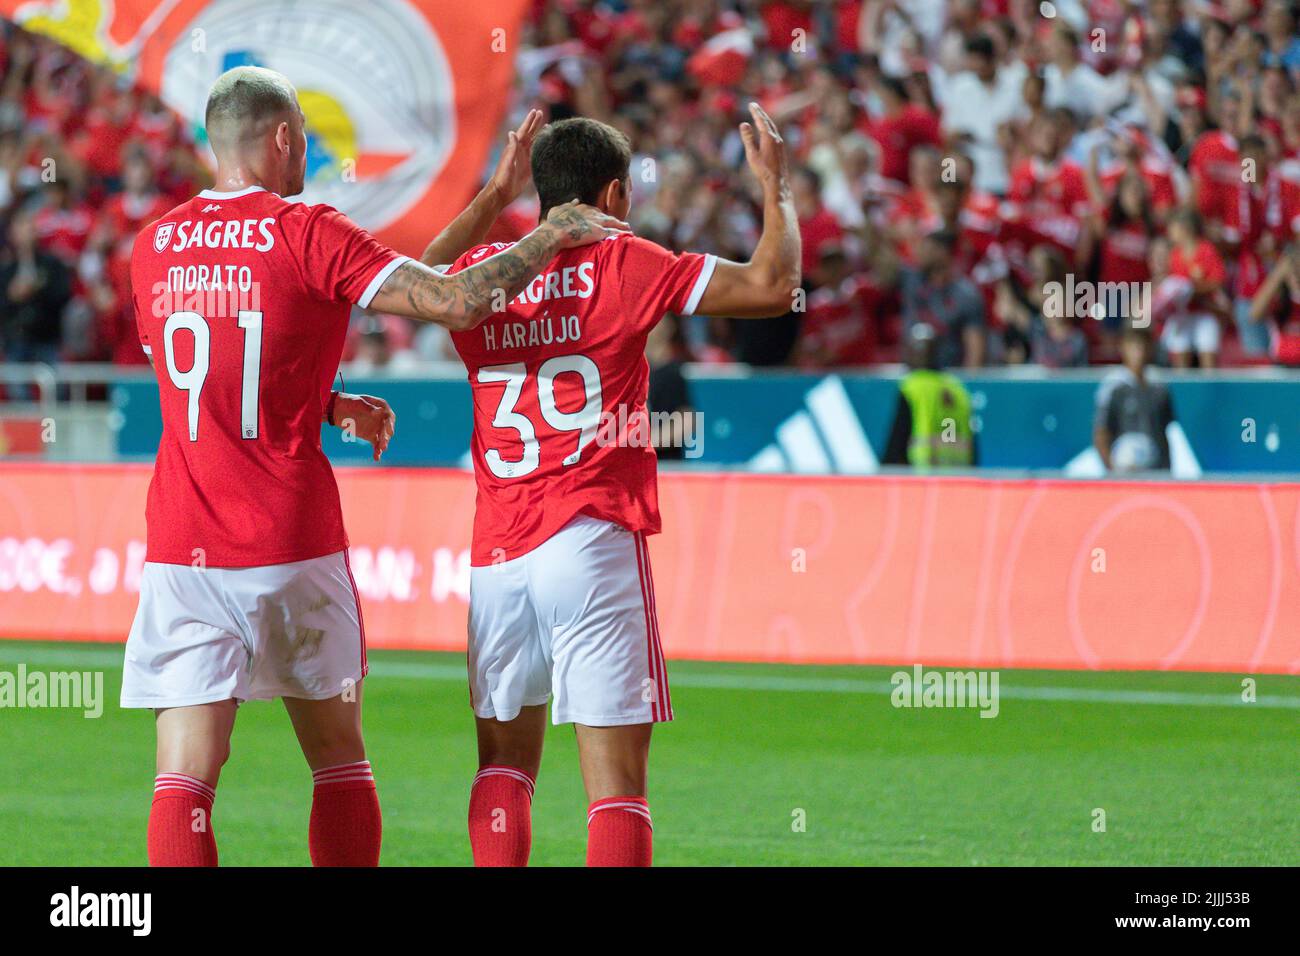 Lisbon, Portugal. July 26, 2022.  Benfica's forward from Portugal Henrique Araujo (39) celebrating with Benfica's defender from Brazil Morato (91) after scoring a goal during the friendly game between SL Benfica vs Newcastle United FC Credit: Alexandre de Sousa/Alamy Live News Stock Photo